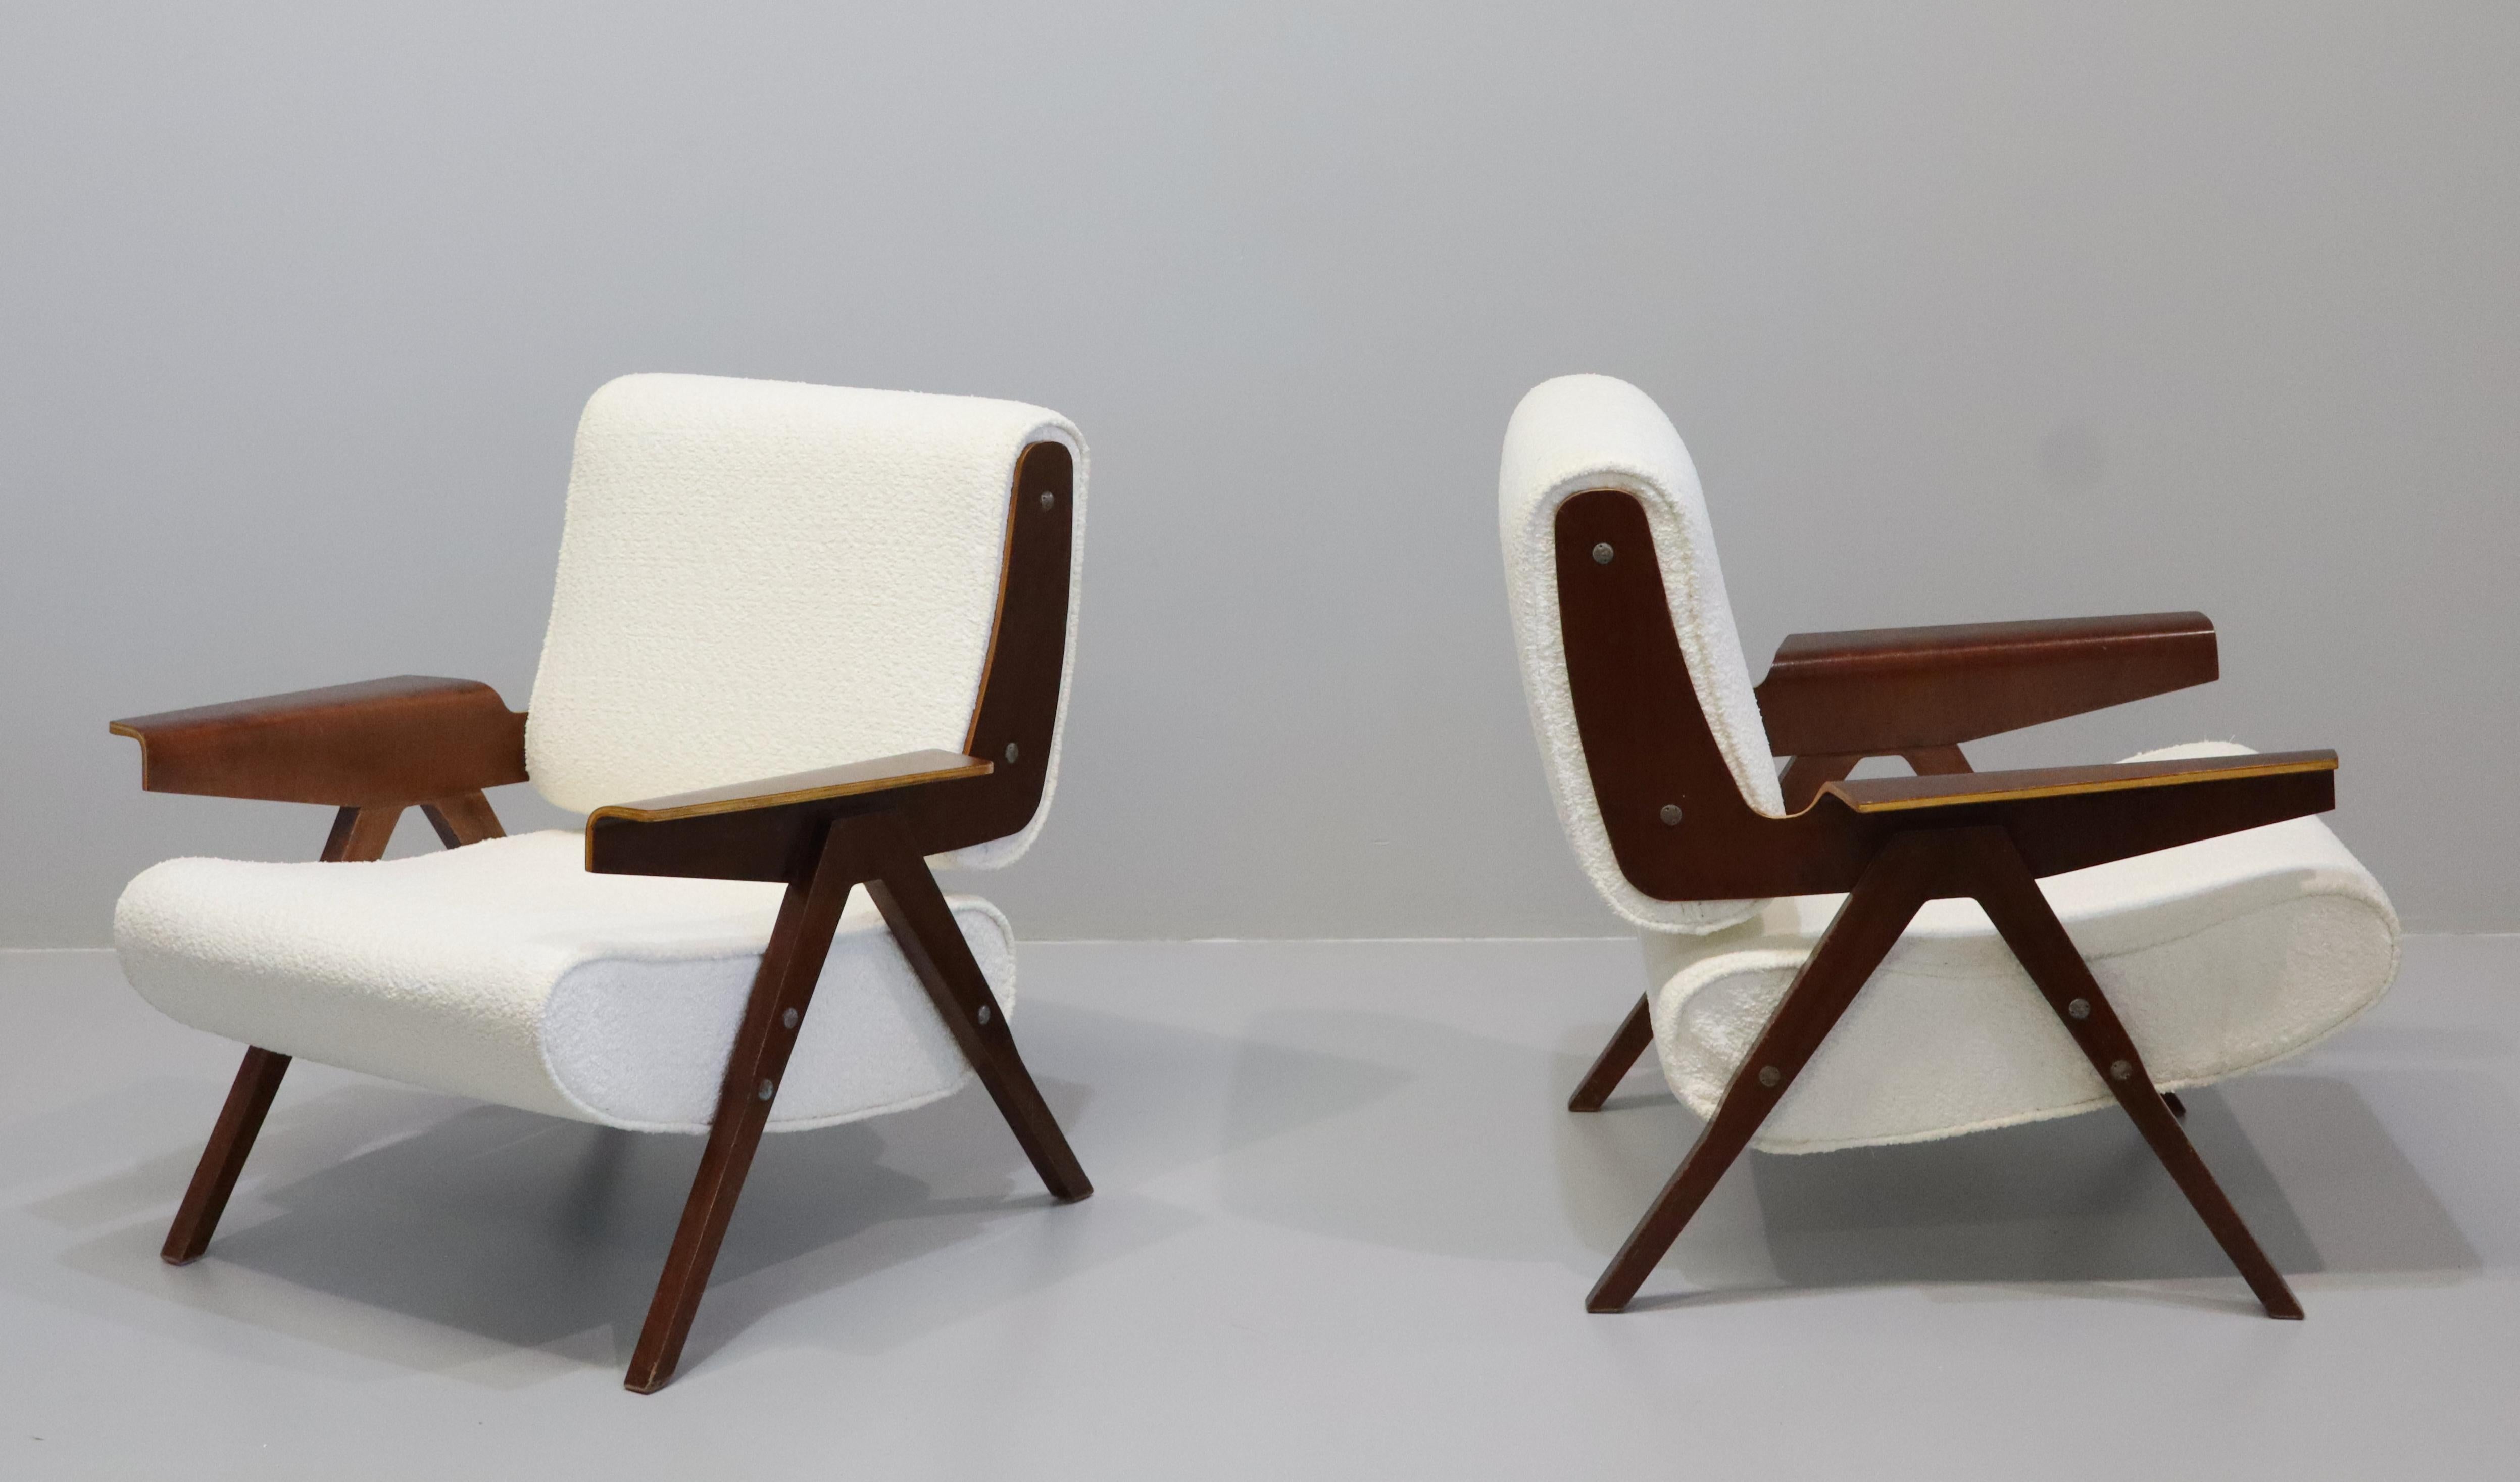 Textile Pair Of Gianfranco Frattini Model 831 Lounge Chairs For Cassina, 1950s For Sale